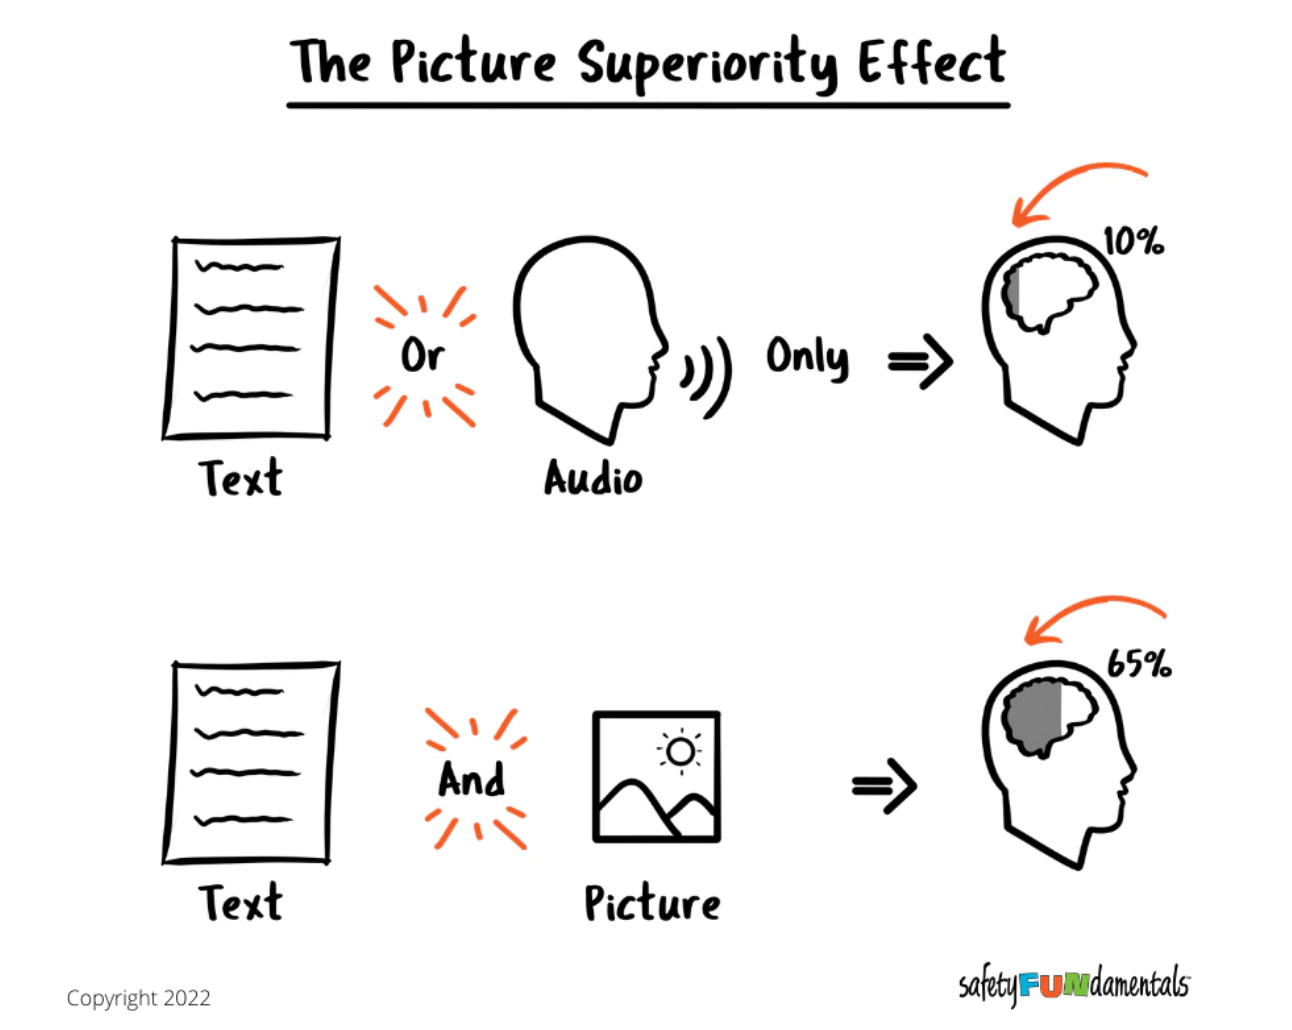 The Picture Superiority Effect